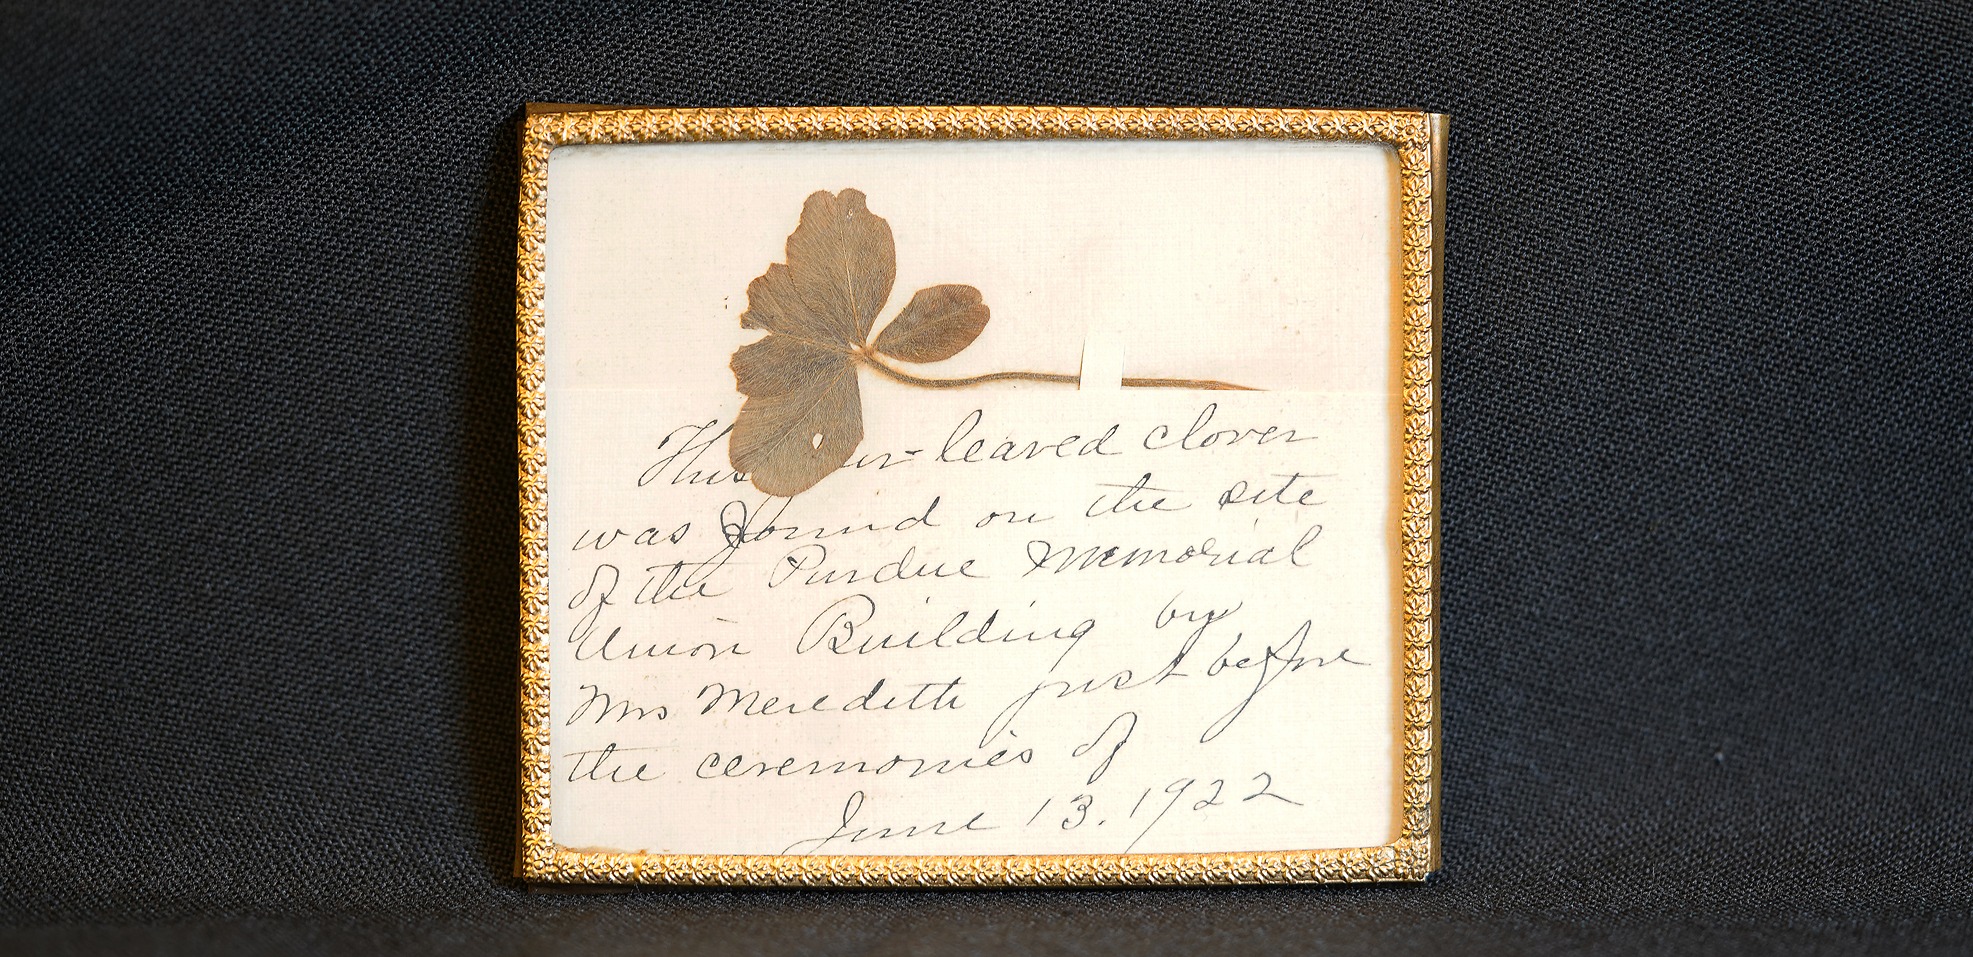 A pressed four leaf clover found by Virginia Meredith during the Purdue Memorial Union's grand opening.